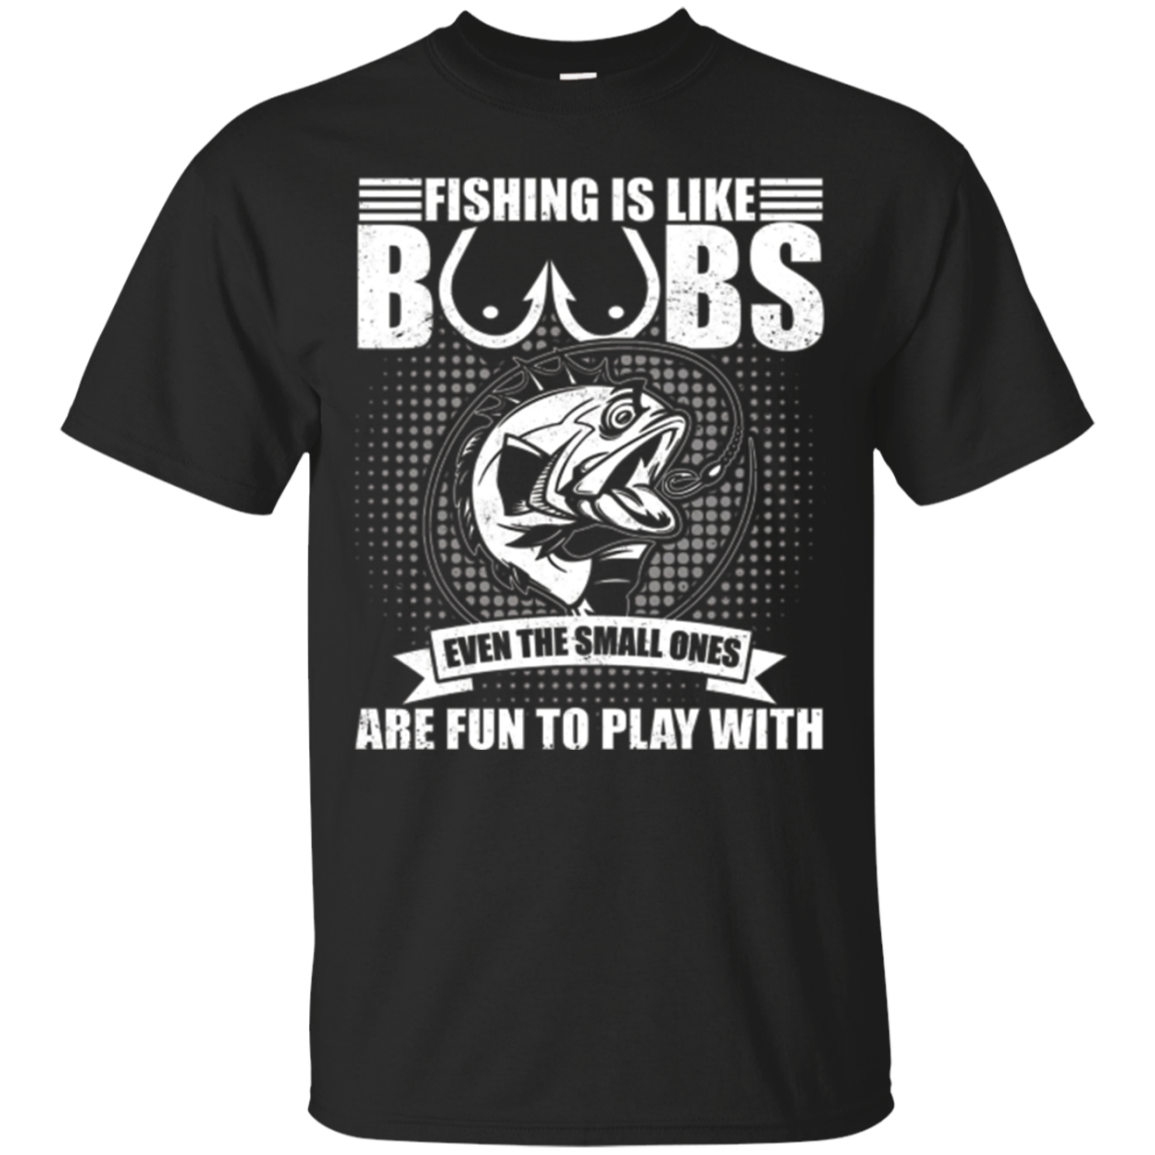 Find Fishing Is Like Boobs Cool Fishing T-shirt Funny Quote Shirt